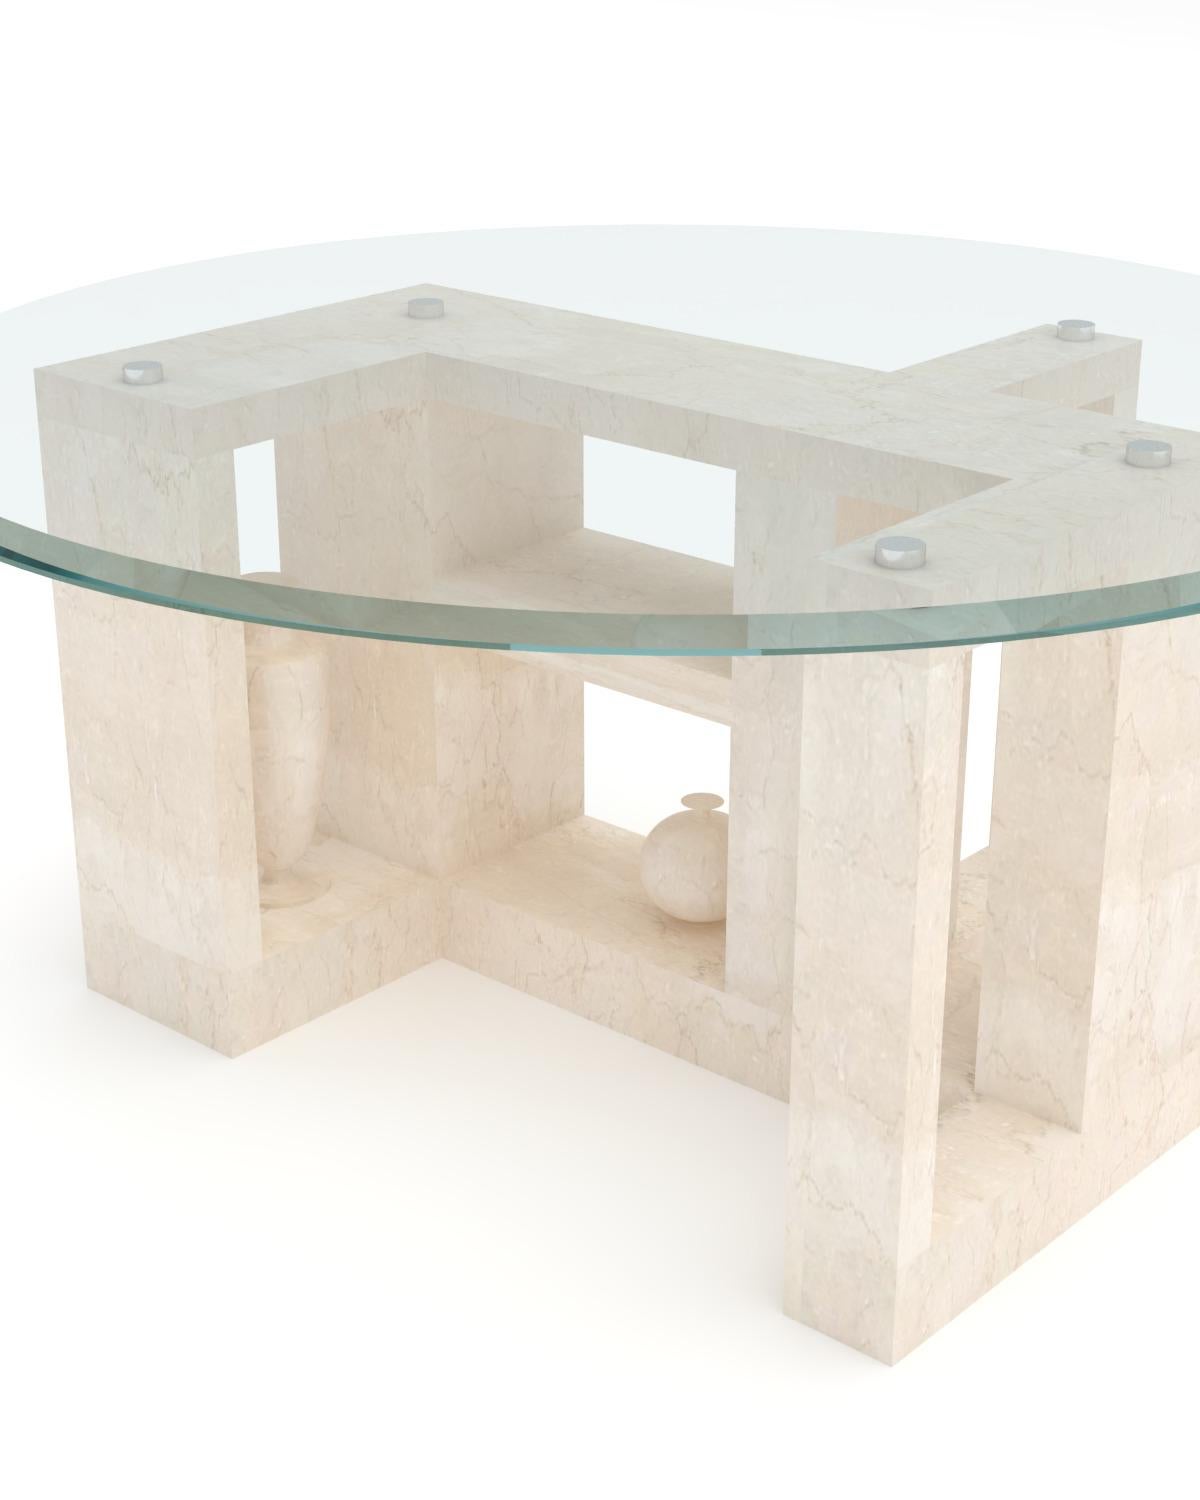 Equipped with a sculptural base and imposing in shape and size, the Archeology 2 marble table takes up the architectural design of an ancient temple and stands out for its strong stage presence and versatility.

Created in collaboration with the